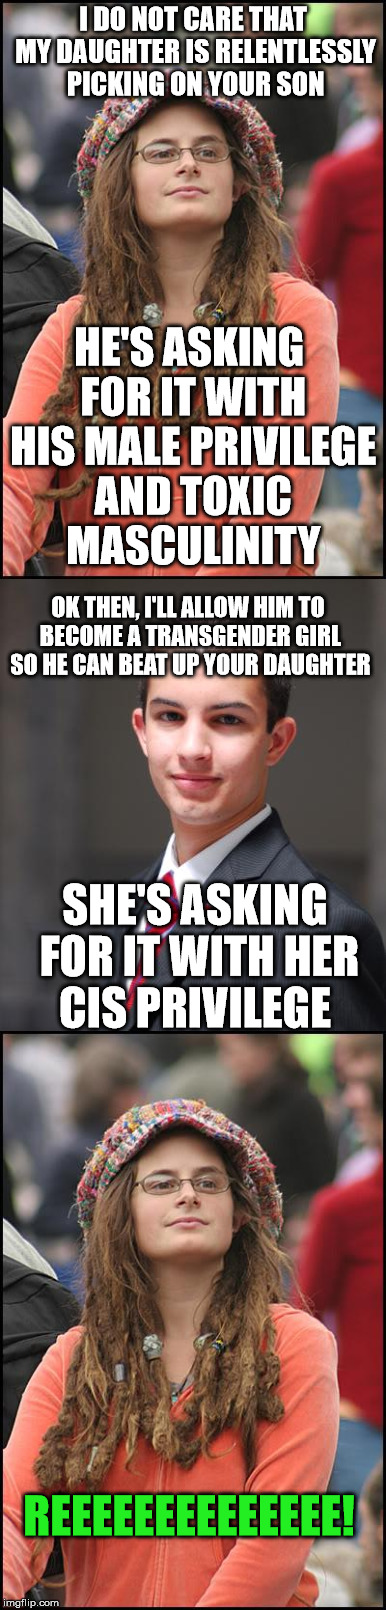 What every parent should do whose son is dealing with a girl bully | I DO NOT CARE THAT MY DAUGHTER IS RELENTLESSLY PICKING ON YOUR SON; HE'S ASKING FOR IT WITH HIS MALE PRIVILEGE AND TOXIC MASCULINITY; OK THEN, I'LL ALLOW HIM TO BECOME A TRANSGENDER GIRL SO HE CAN BEAT UP YOUR DAUGHTER; SHE'S ASKING FOR IT WITH HER CIS PRIVILEGE; REEEEEEEEEEEEEE! | image tagged in college liberal,college conservative | made w/ Imgflip meme maker